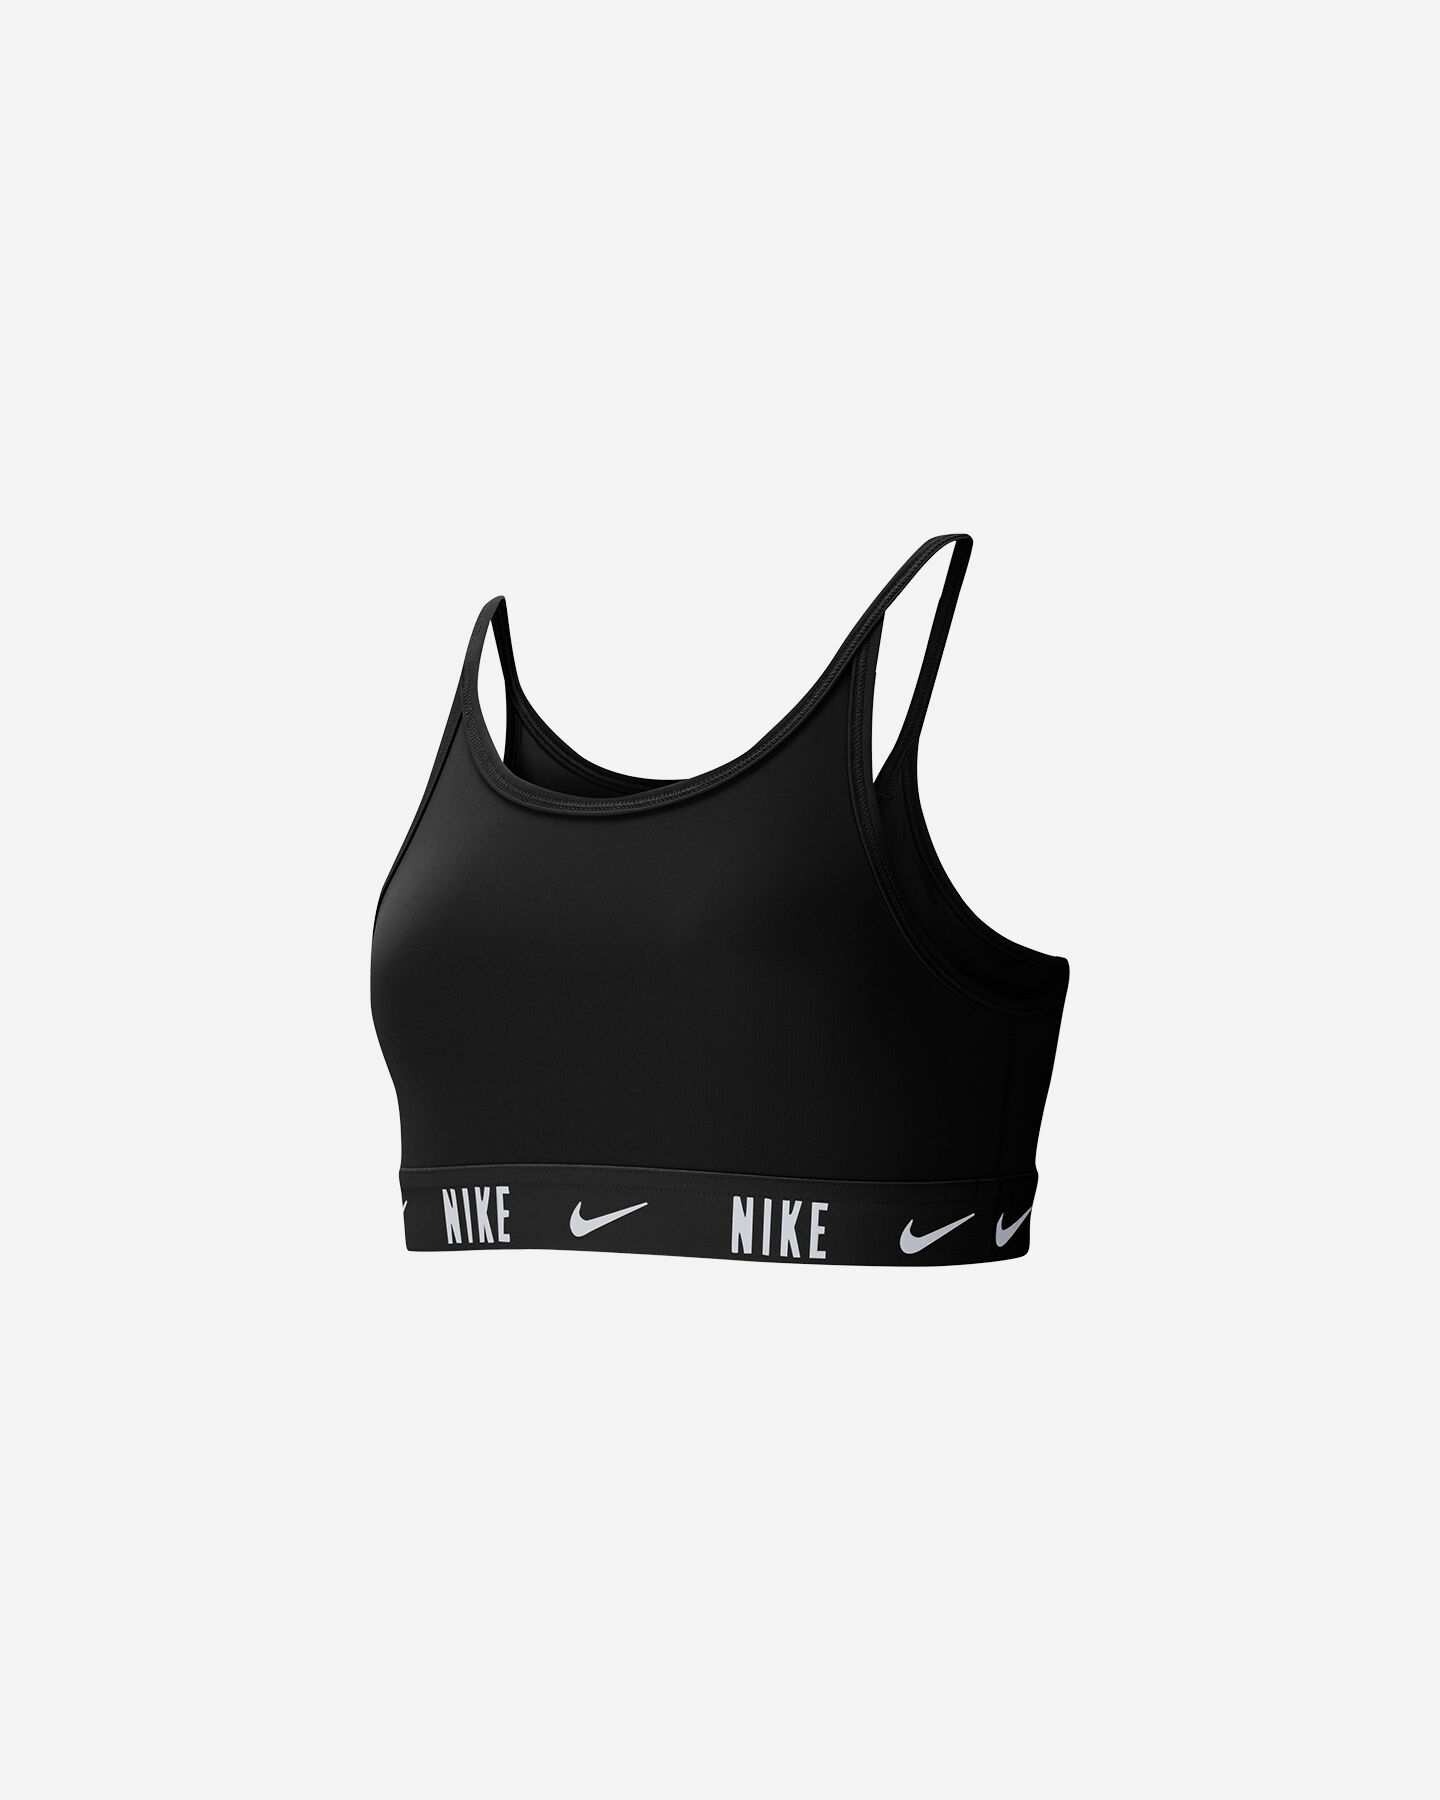  Canotta NIKE TROPHY JR S5268741|010|S scatto 0